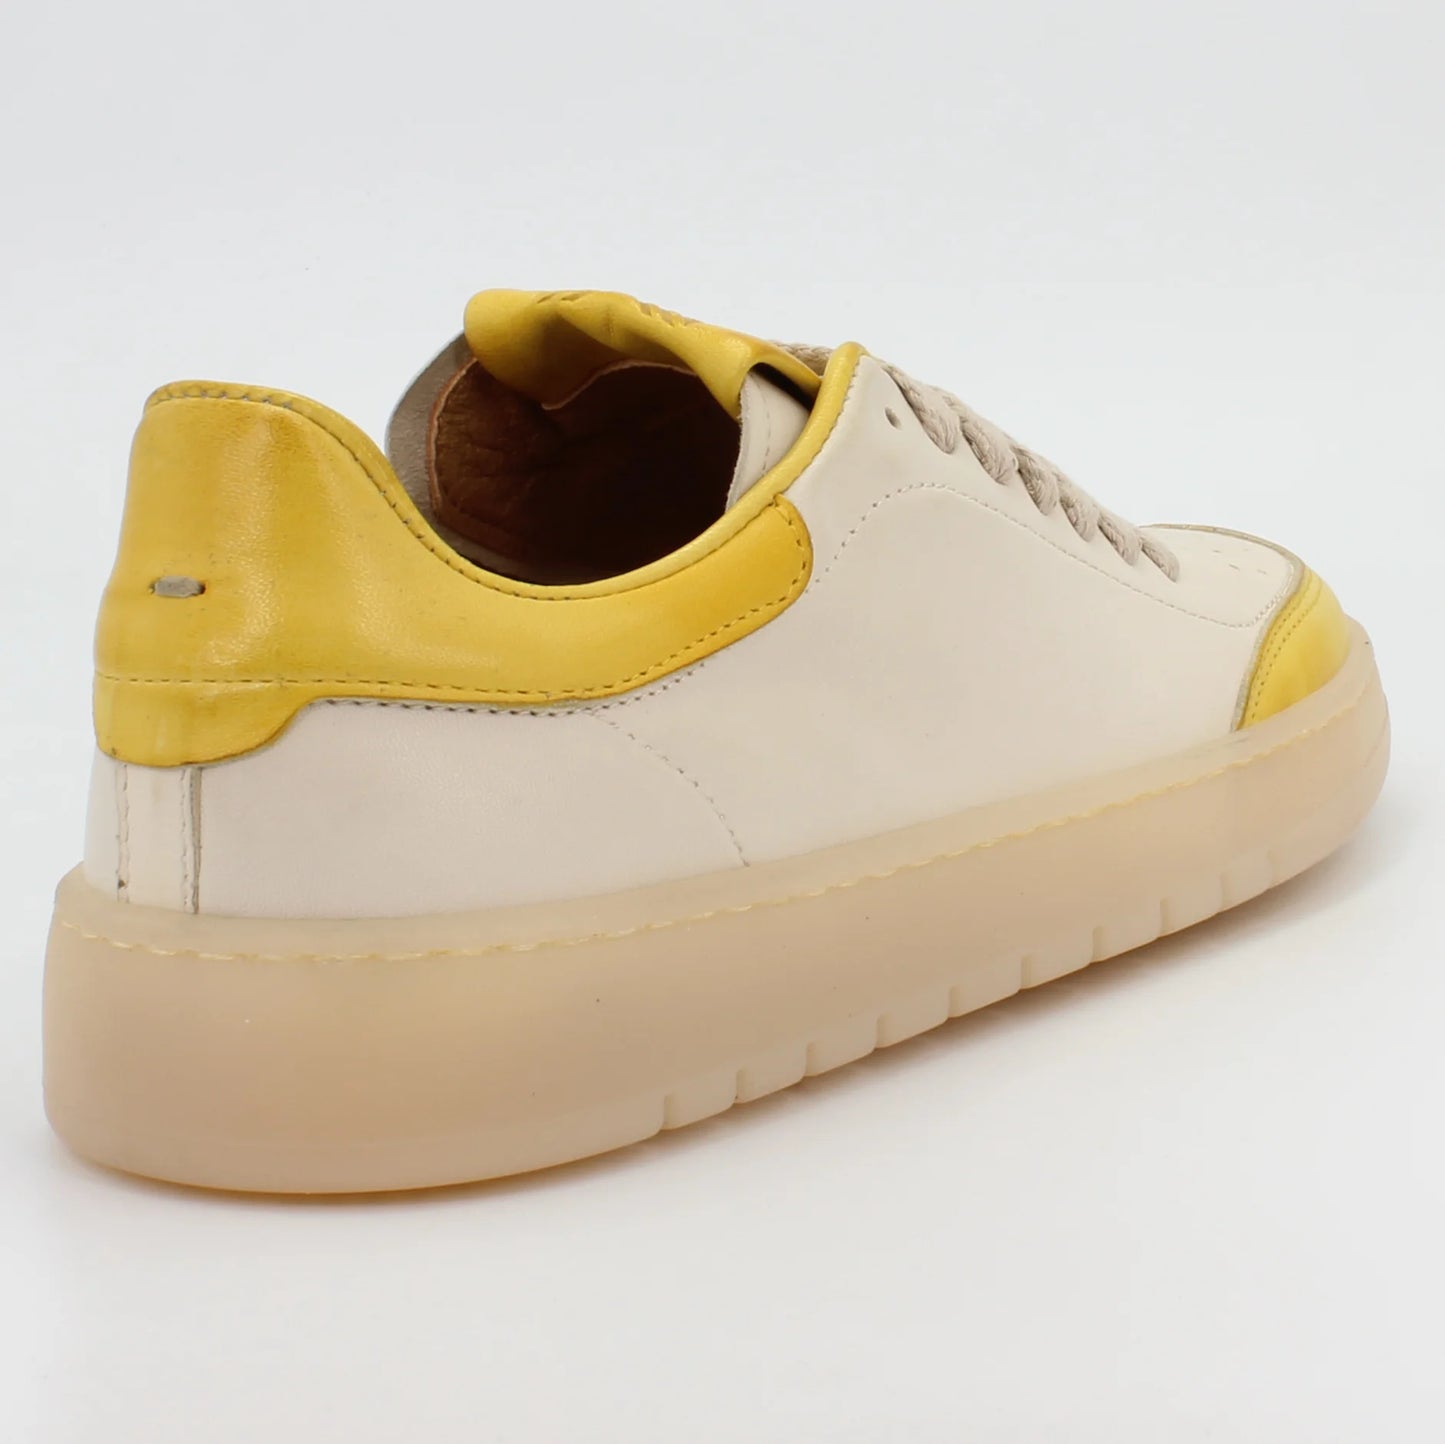 Shop Handmade Italian Leather sneaker in natur yellow (GRD704) or browse our range of hand-made Italian shoes for men in leather or suede in-store at Aliverti Cape Town, or shop online. We deliver in South Africa & offer multiple payment plans as well as accept multiple safe & secure payment methods.